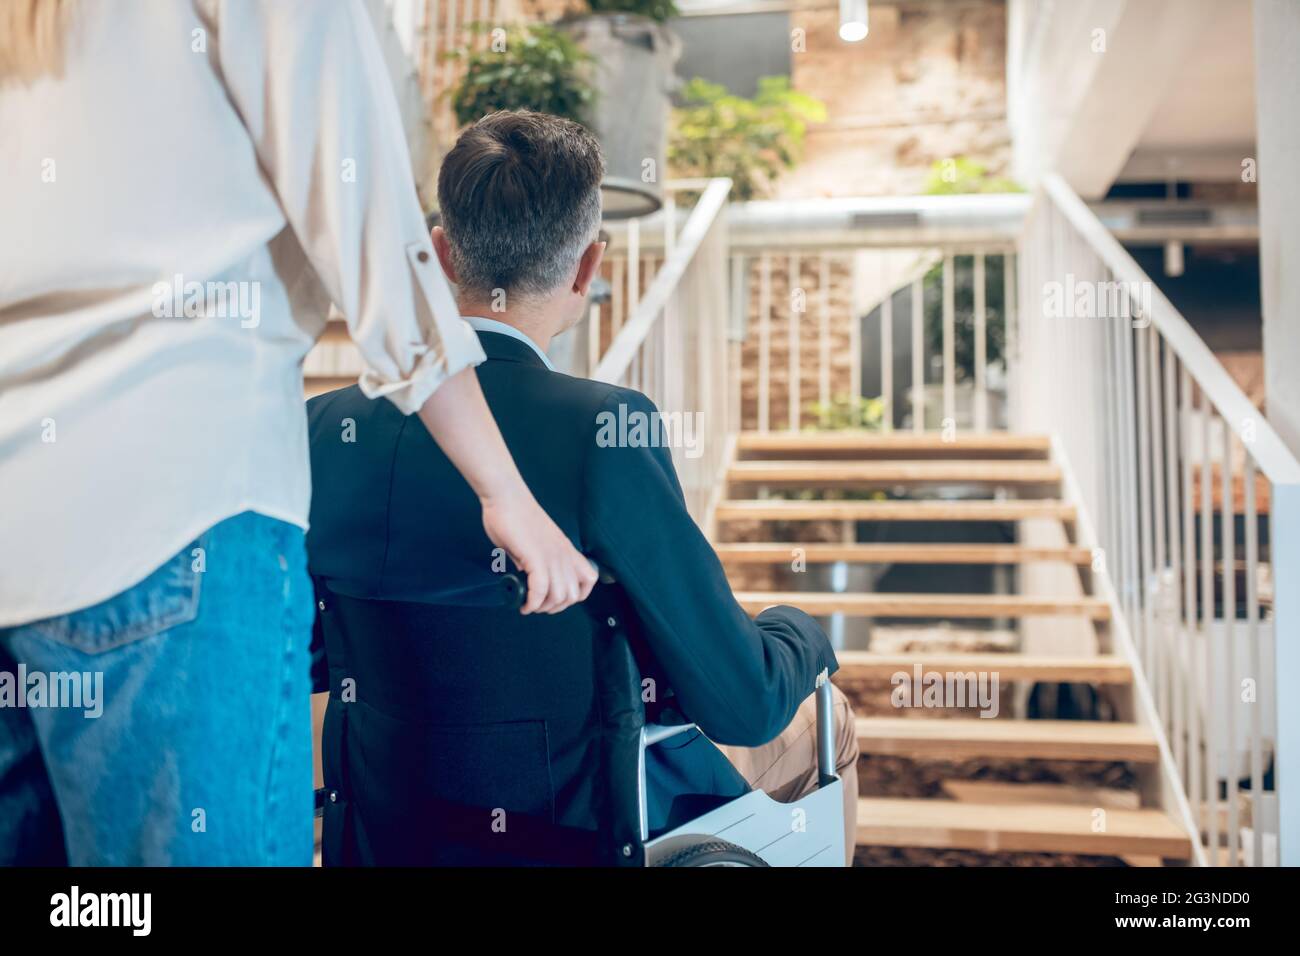 Back view of man in wheelchair and assistant Stock Photo